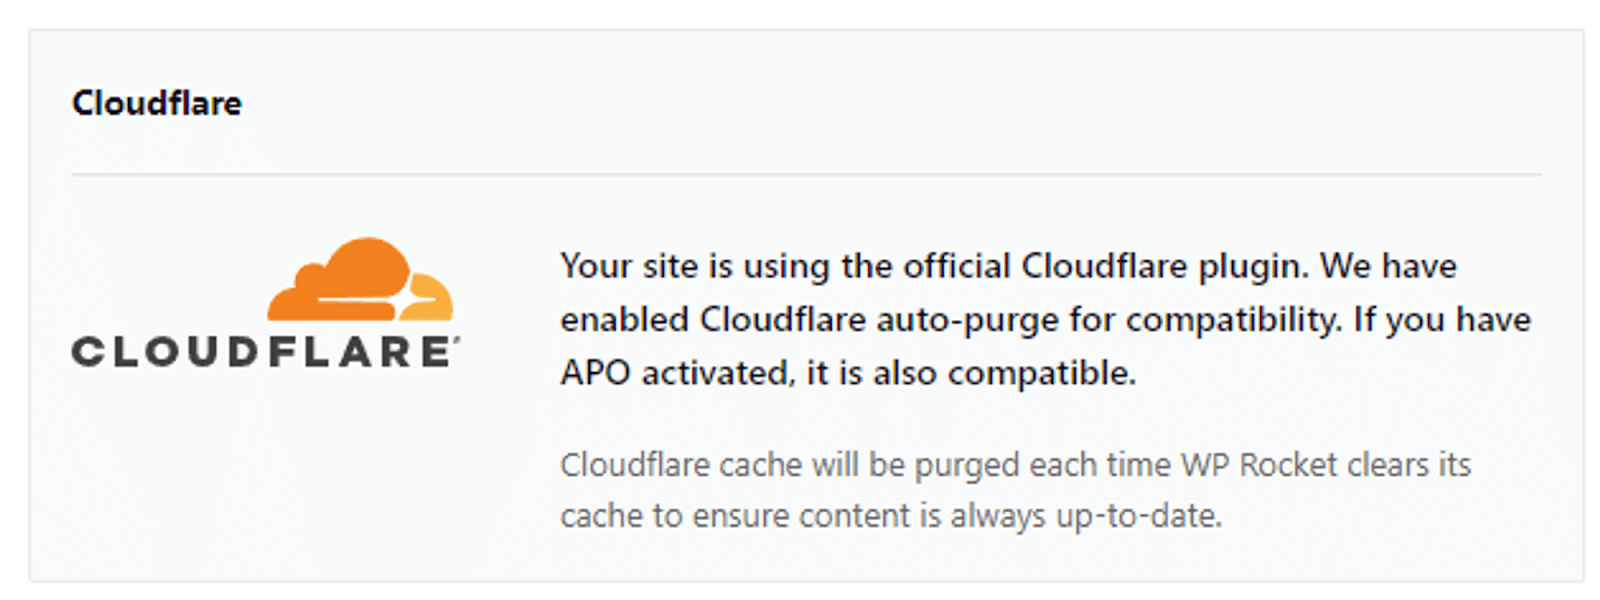 The message confirming the Cloudflare plugin works with full compatibility
